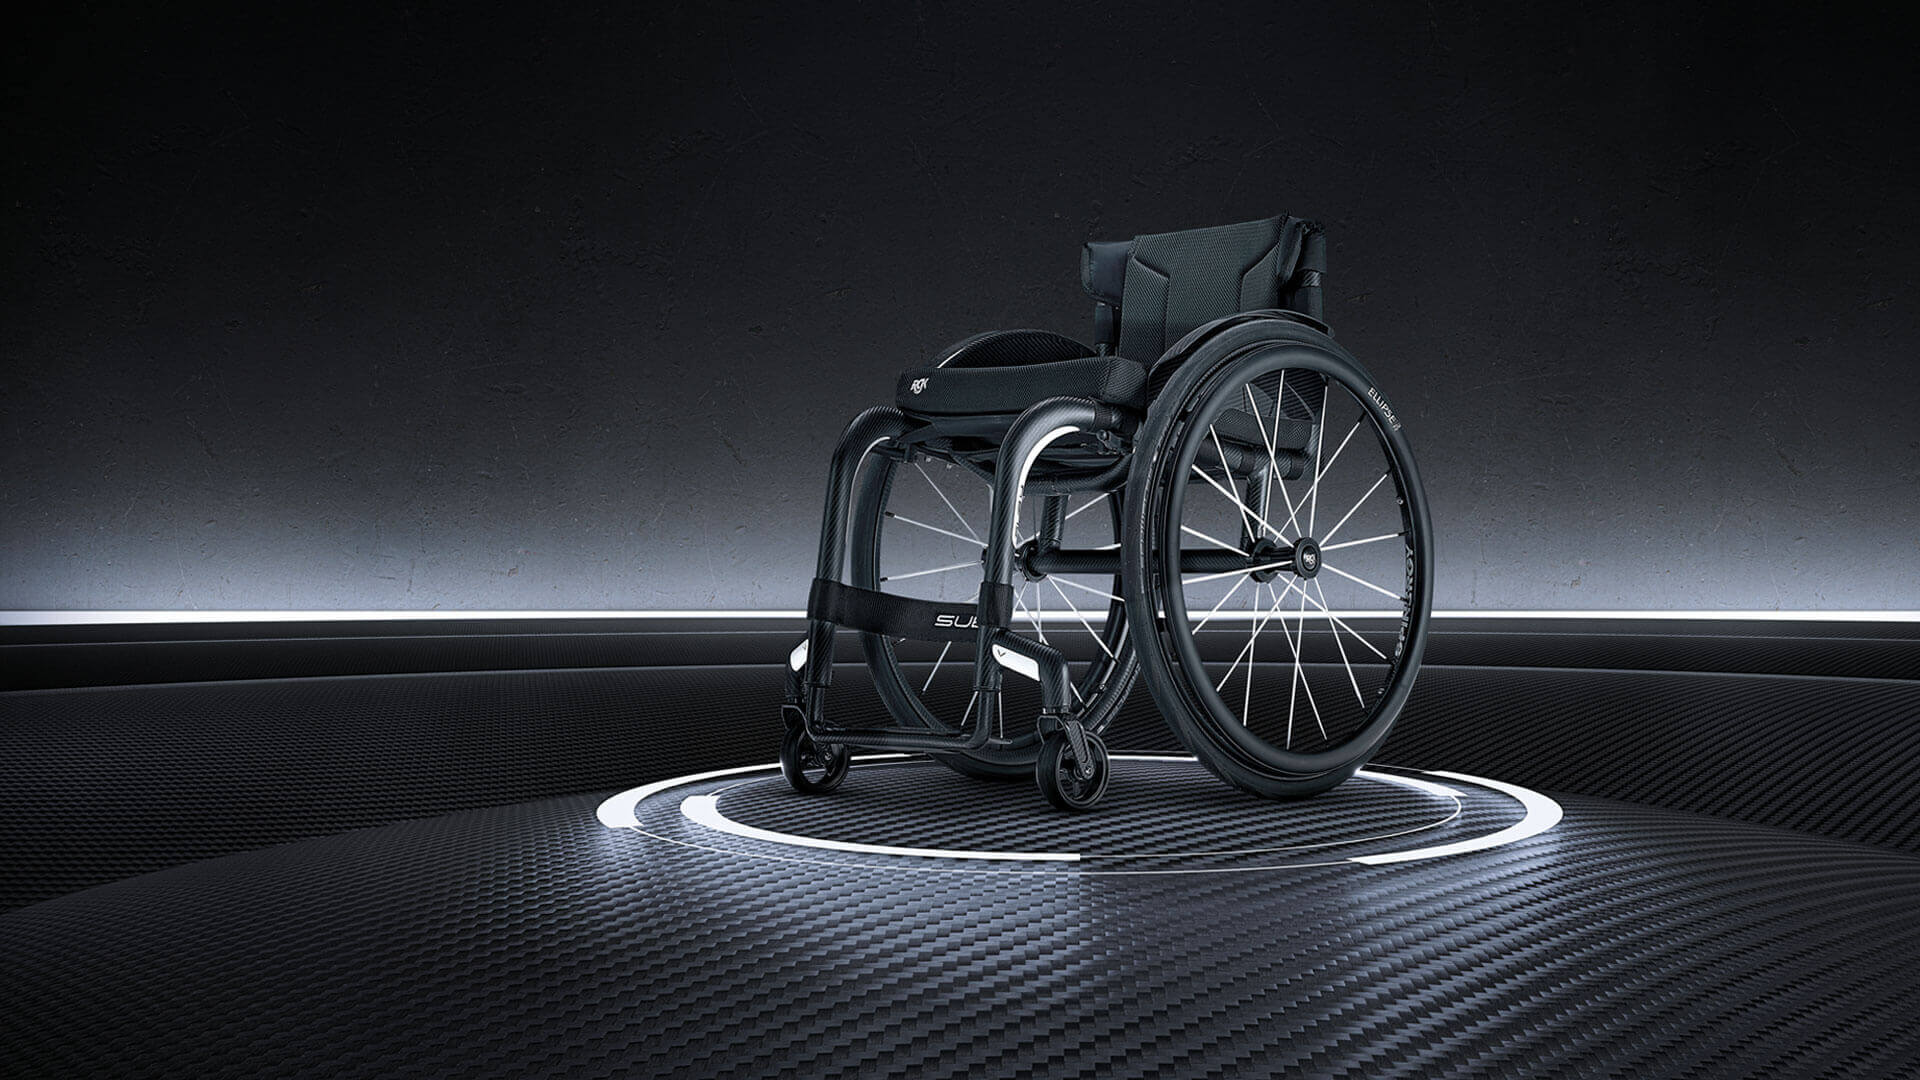 RGK, Part of Sunrise Medical Group, Launch the Veypr Sub4, the World’s First Truly Made to Measure Carbon Fibre Wheelchair